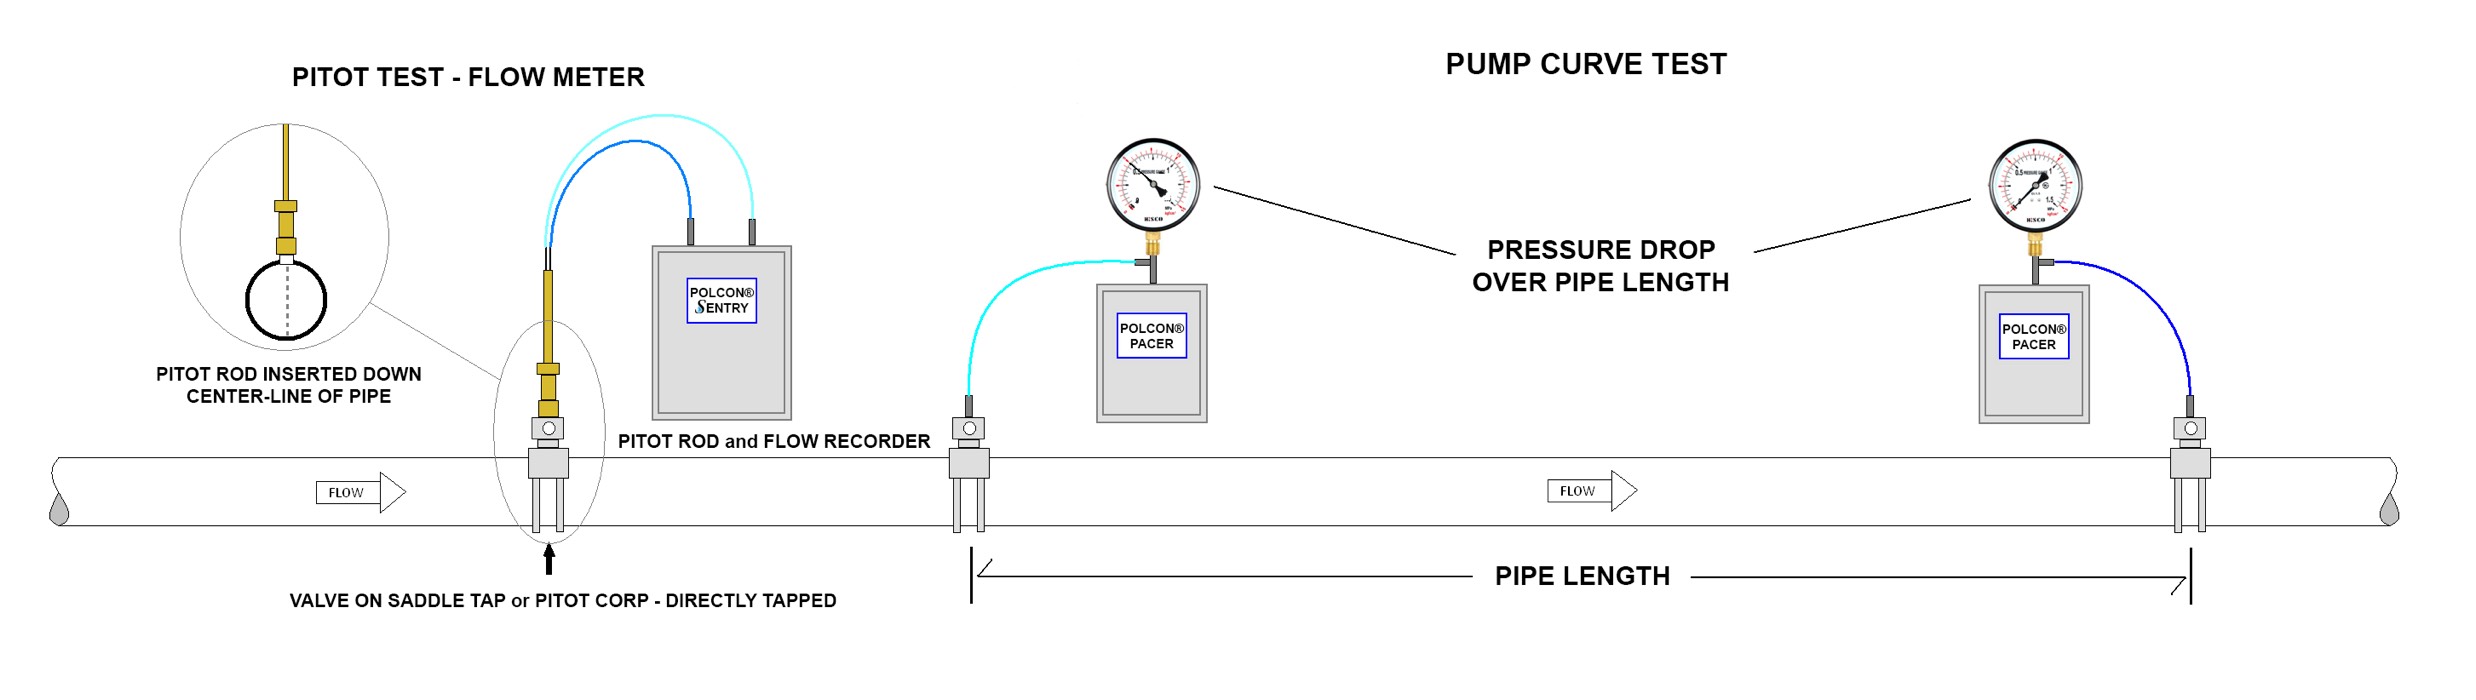 Ensure your water systems are running effectively with ME Simpson and a pump curve test using Polcon Products.